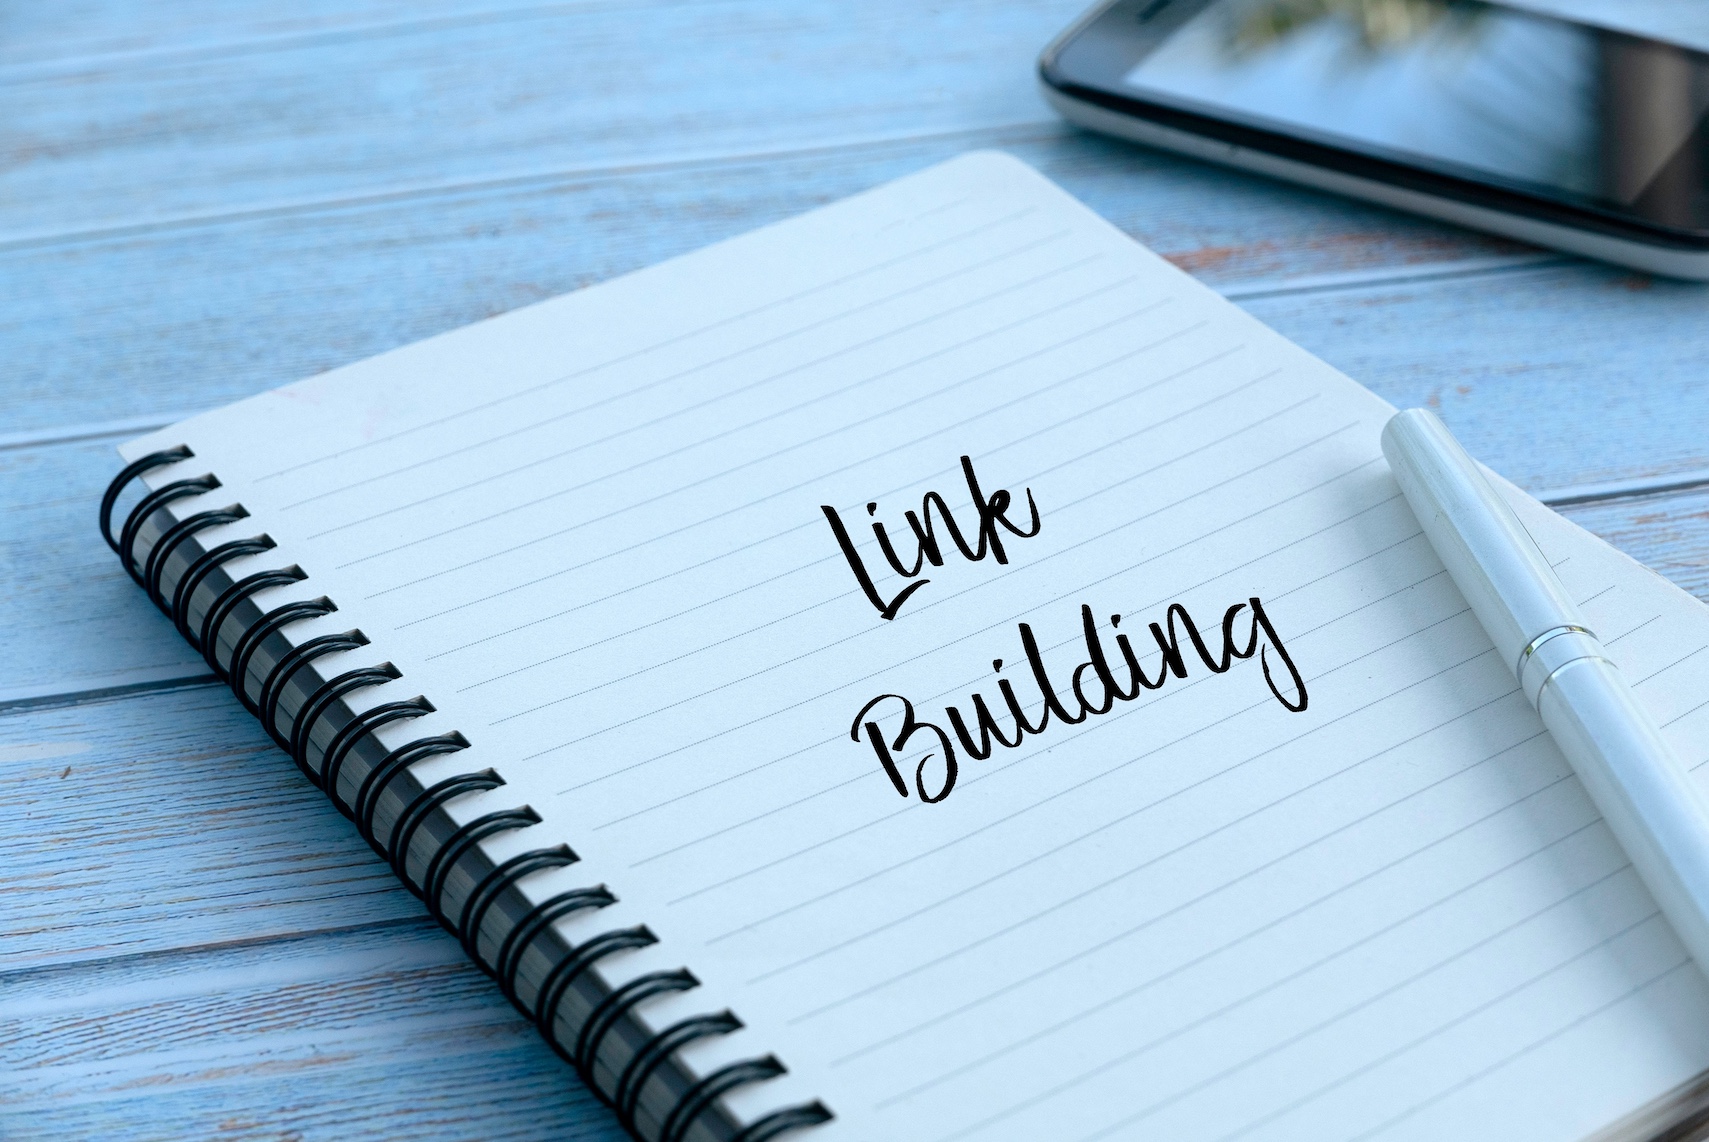 Local Link Building and Outreach